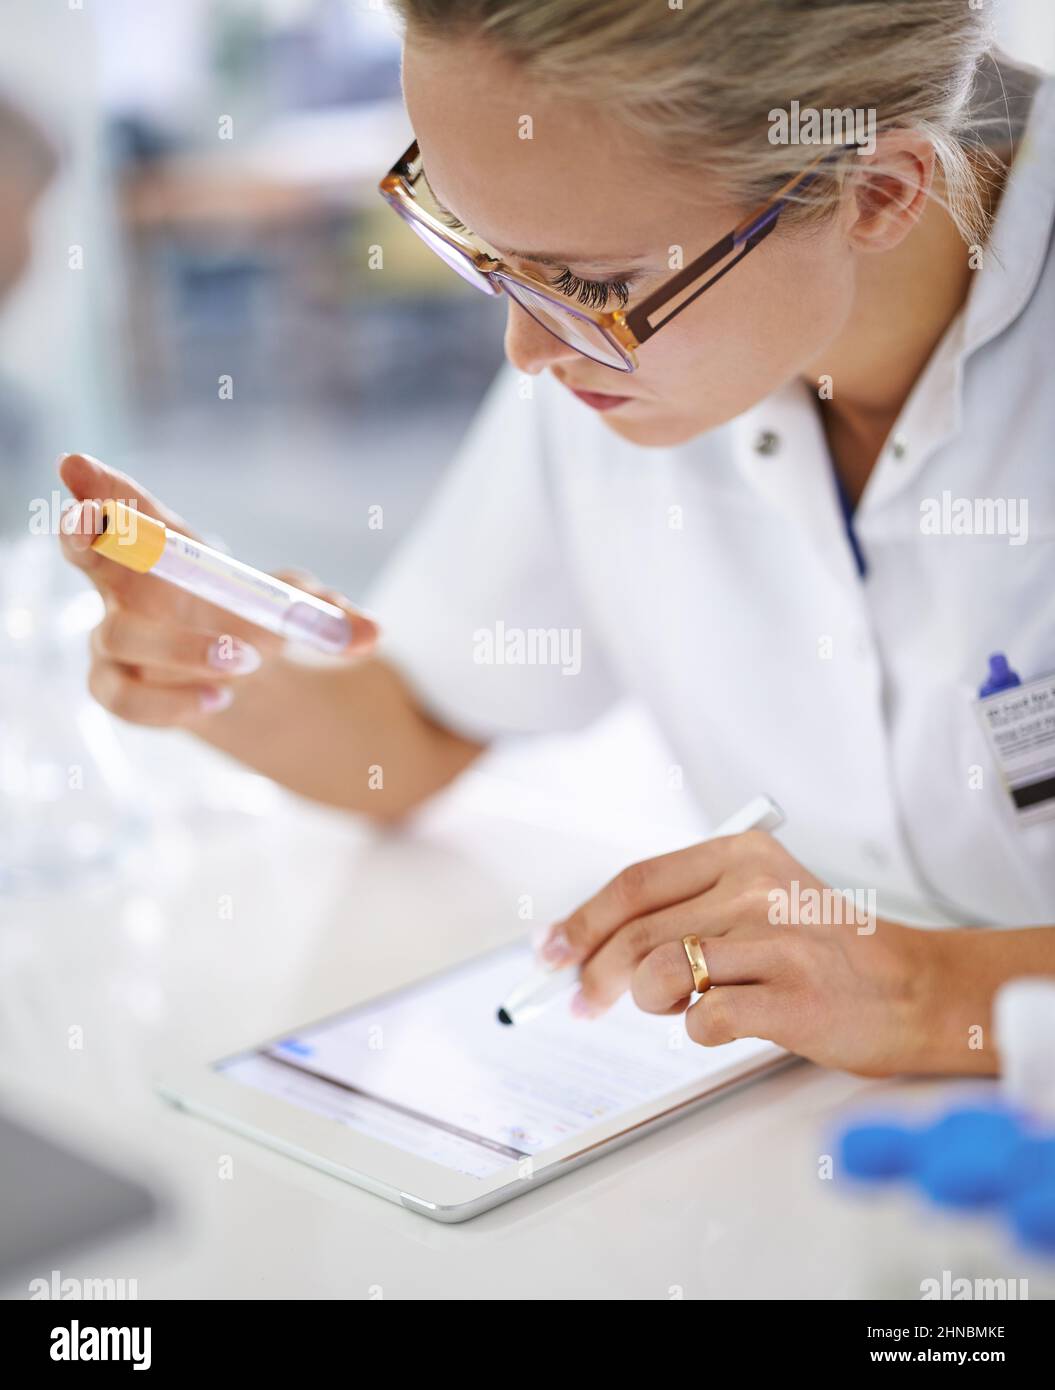 Research and development. A young scientist recording her findings on a tablet. Stock Photo